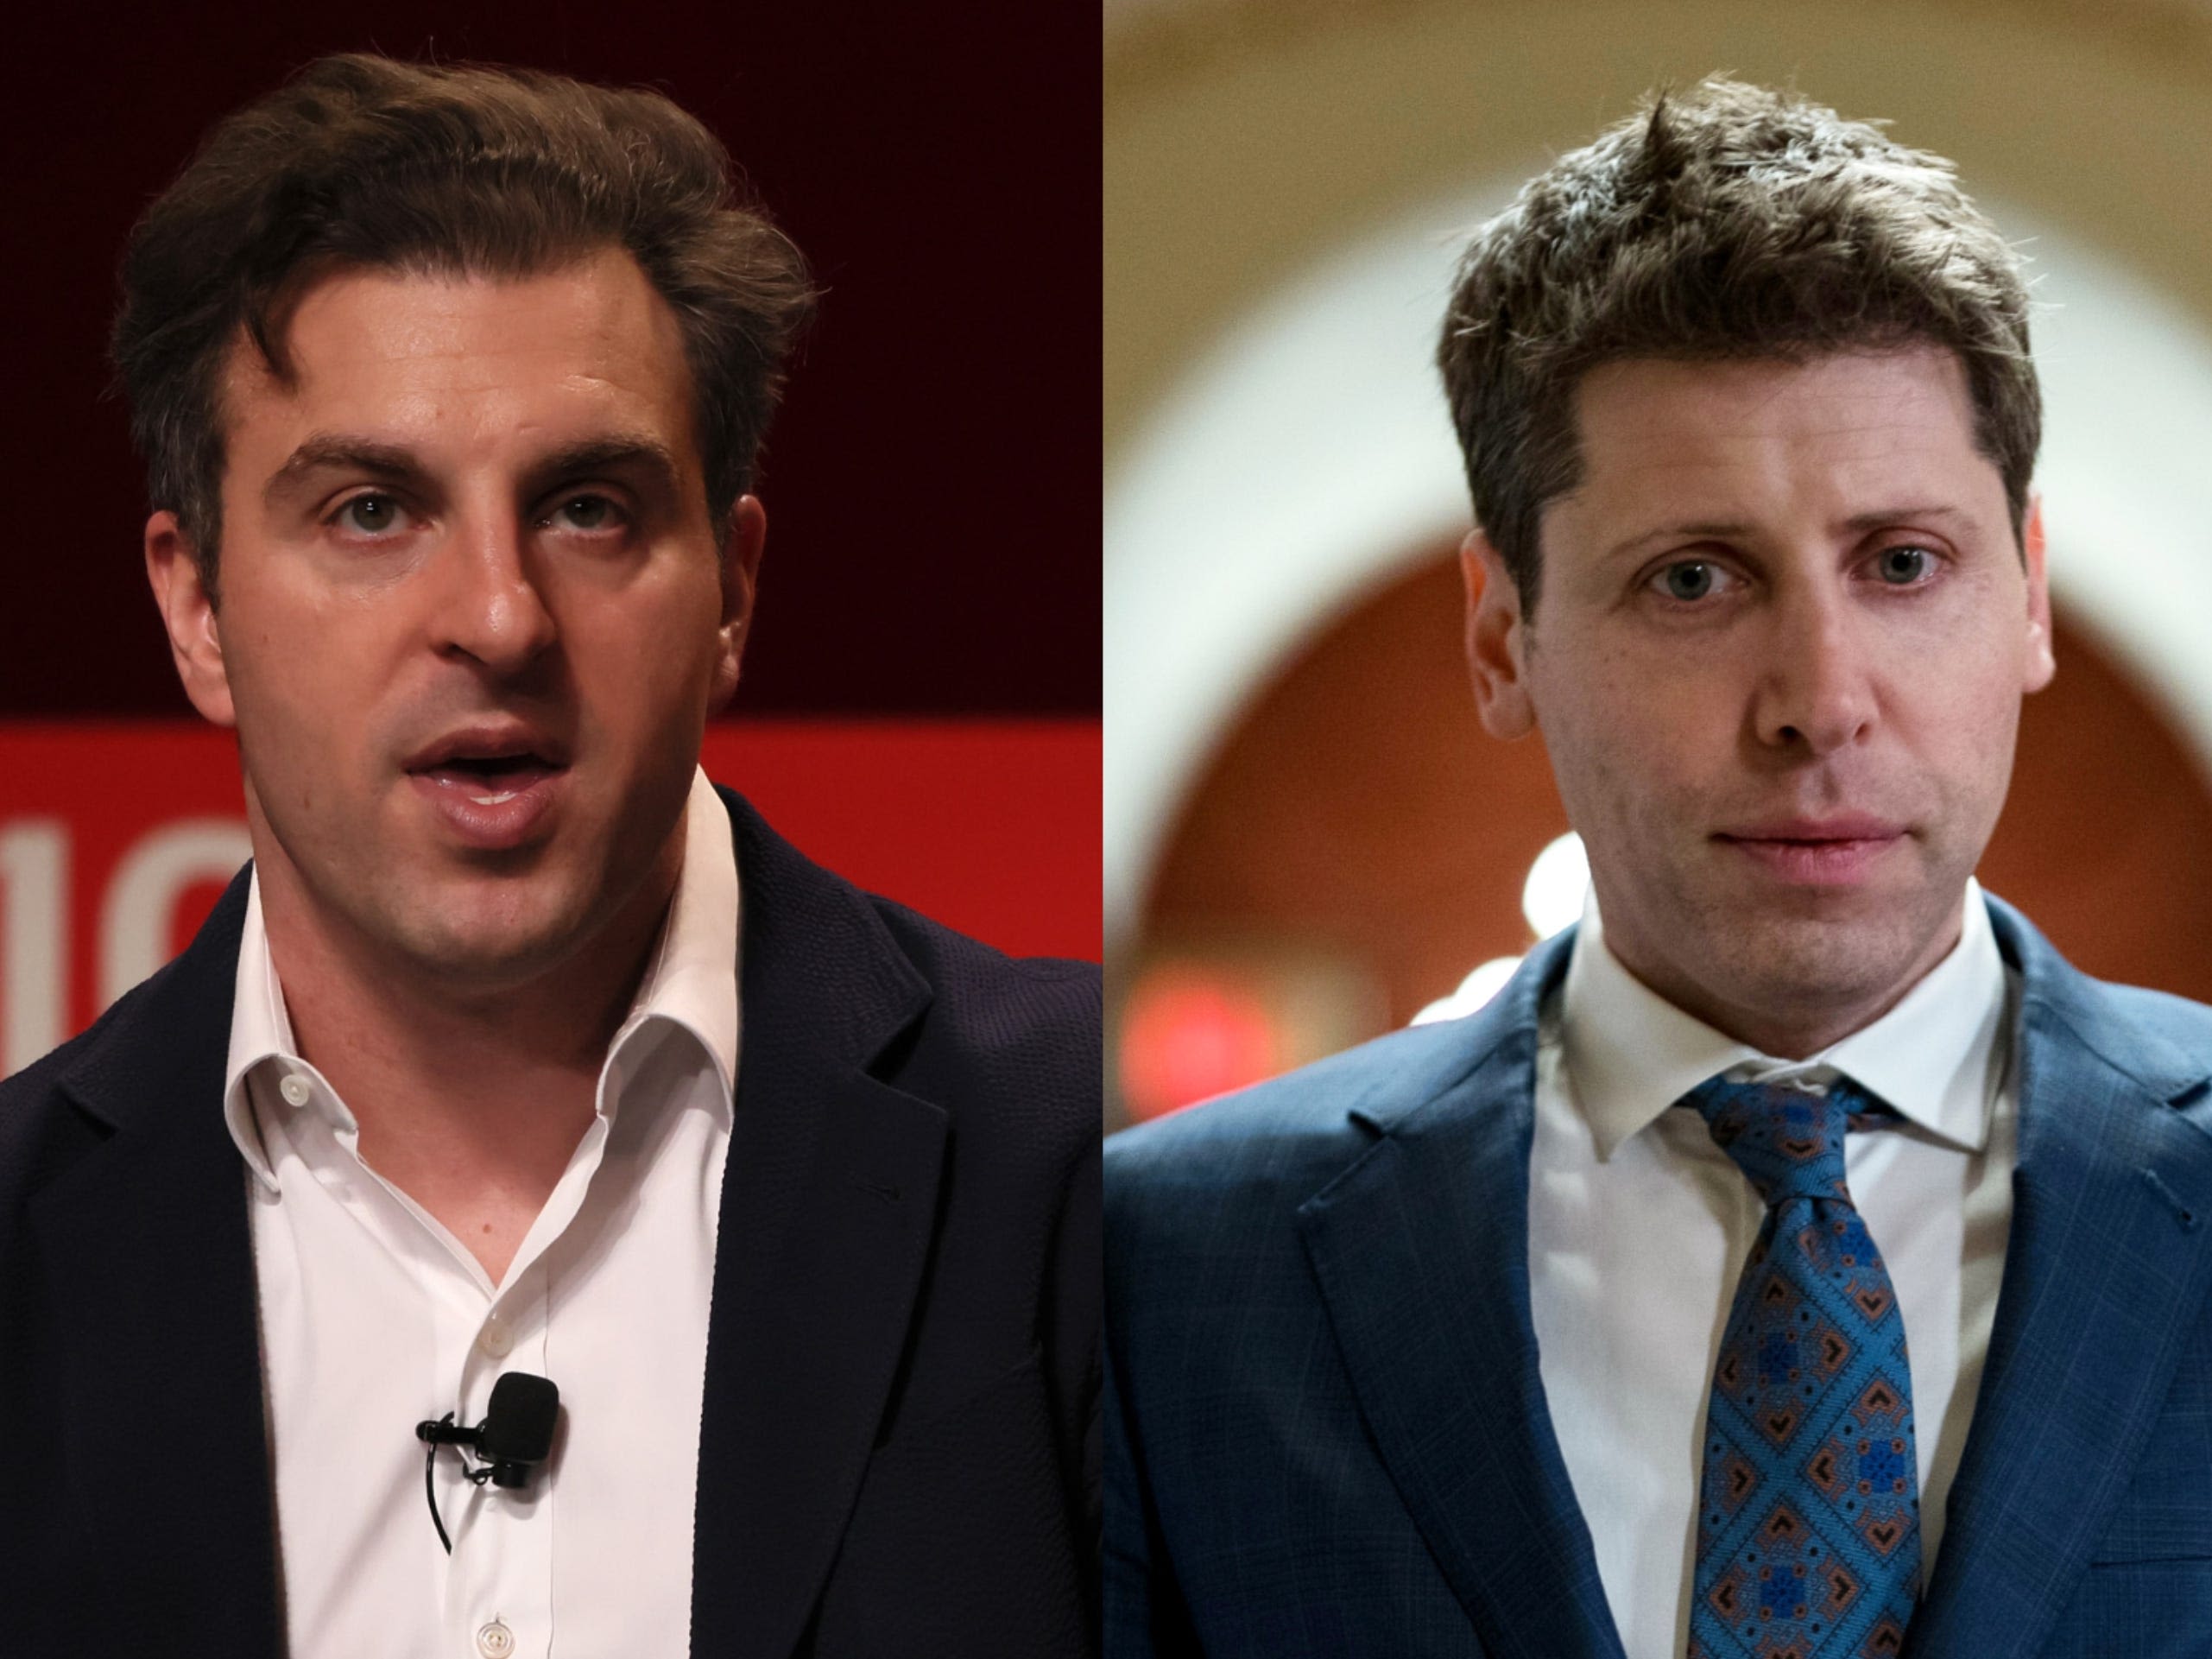 The 'worst moment' of Sam Altman's OpenAI ousting happened just before midnight, Airbnb CEO said